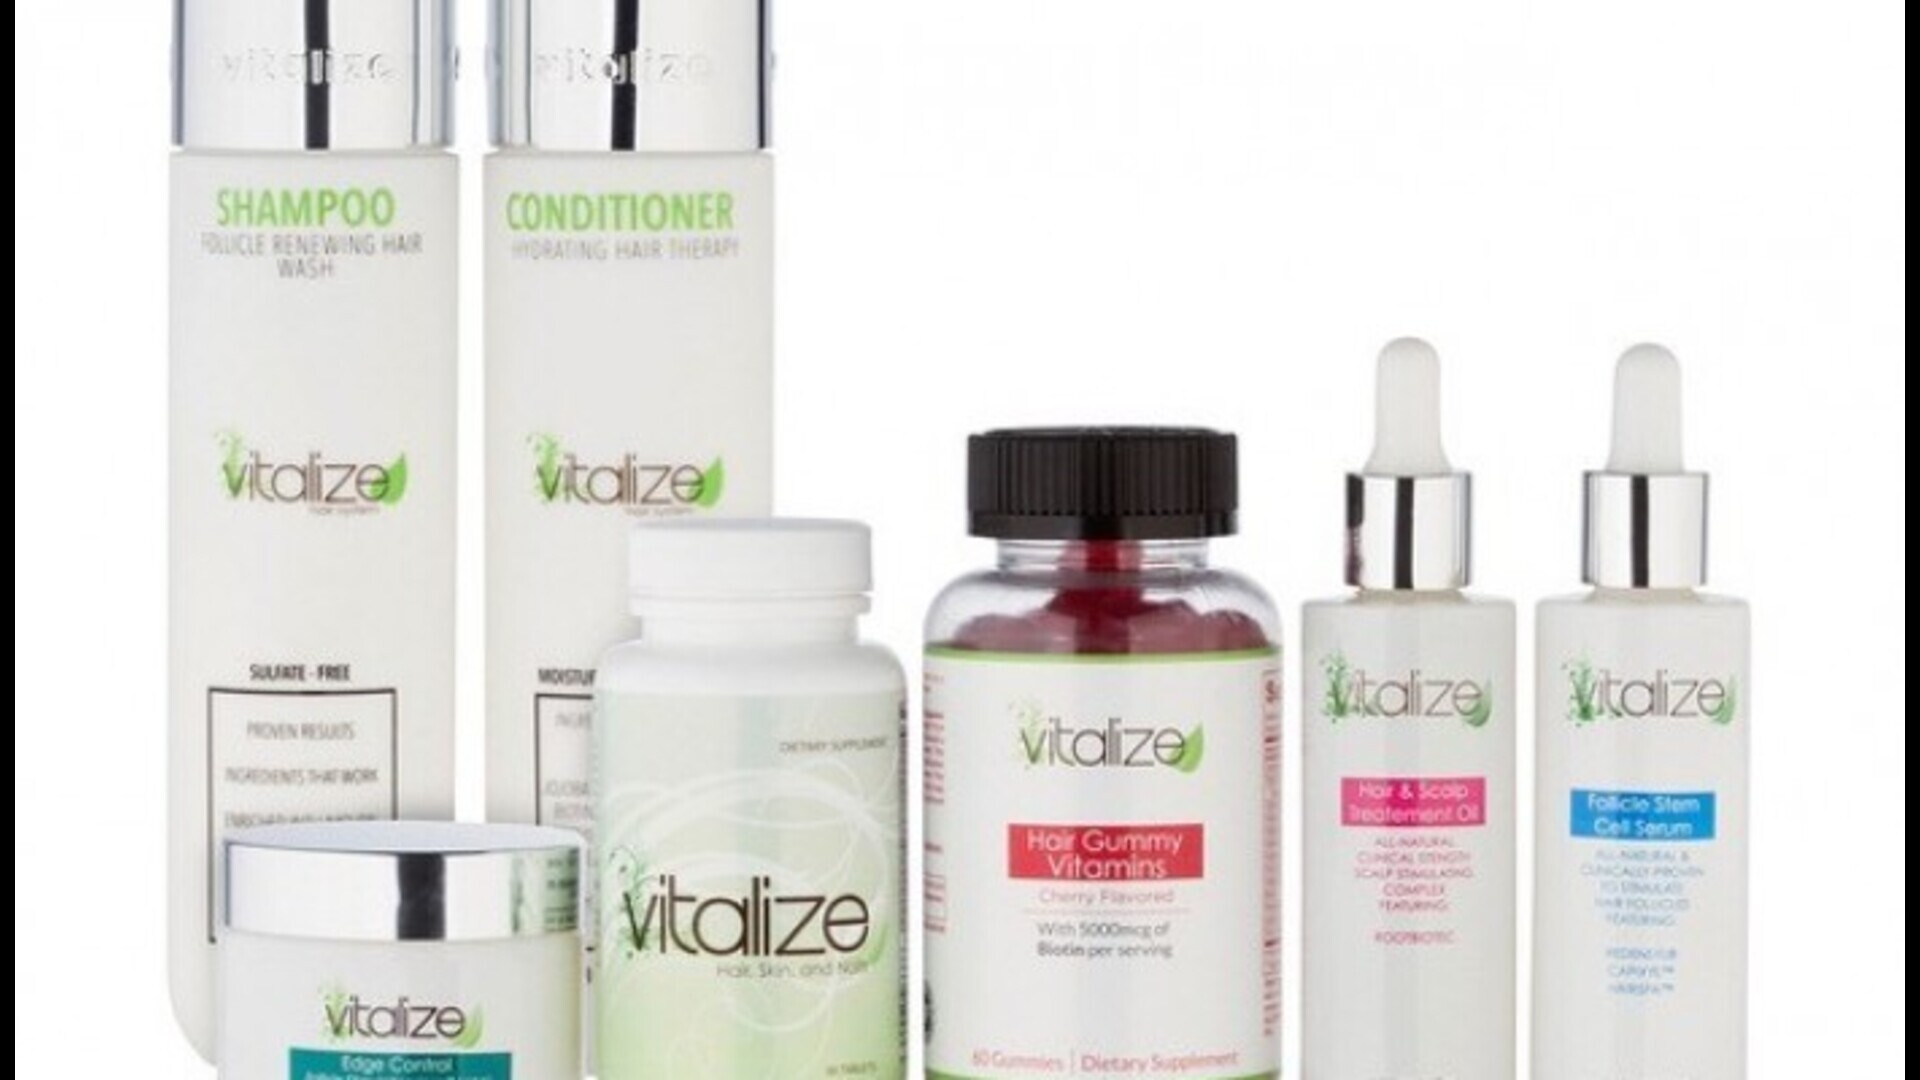 The Vitalize Hair System Will Repair Your Hair